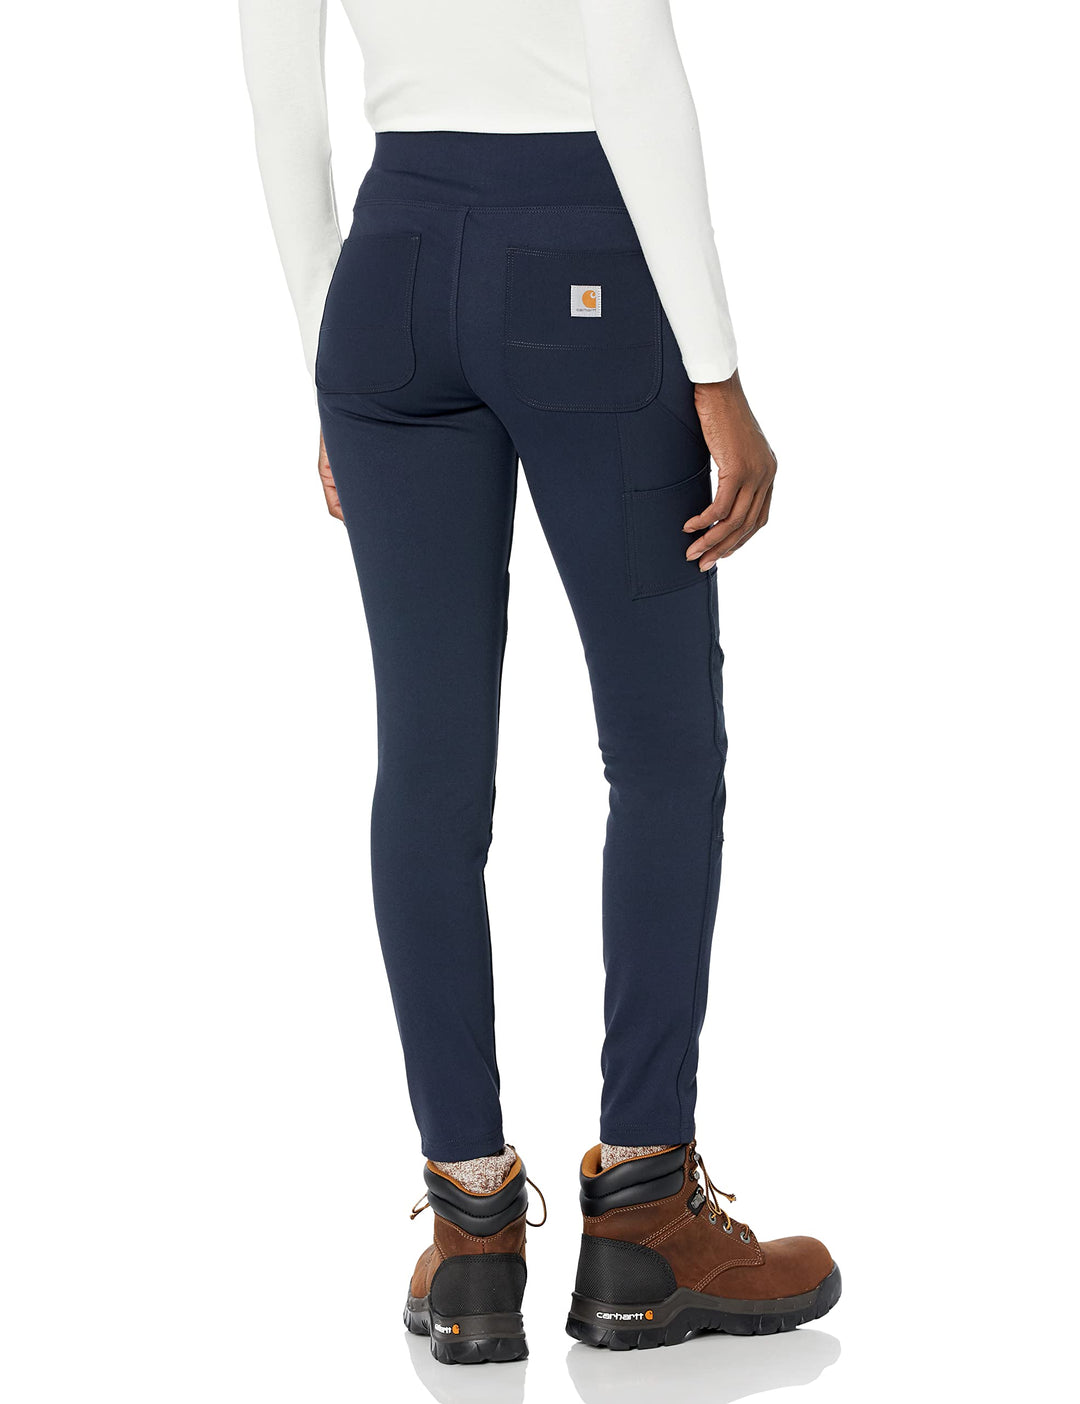 Carhartt womens Force Fitted Midweight Utility Leggings, Navy, X-Small Tall US